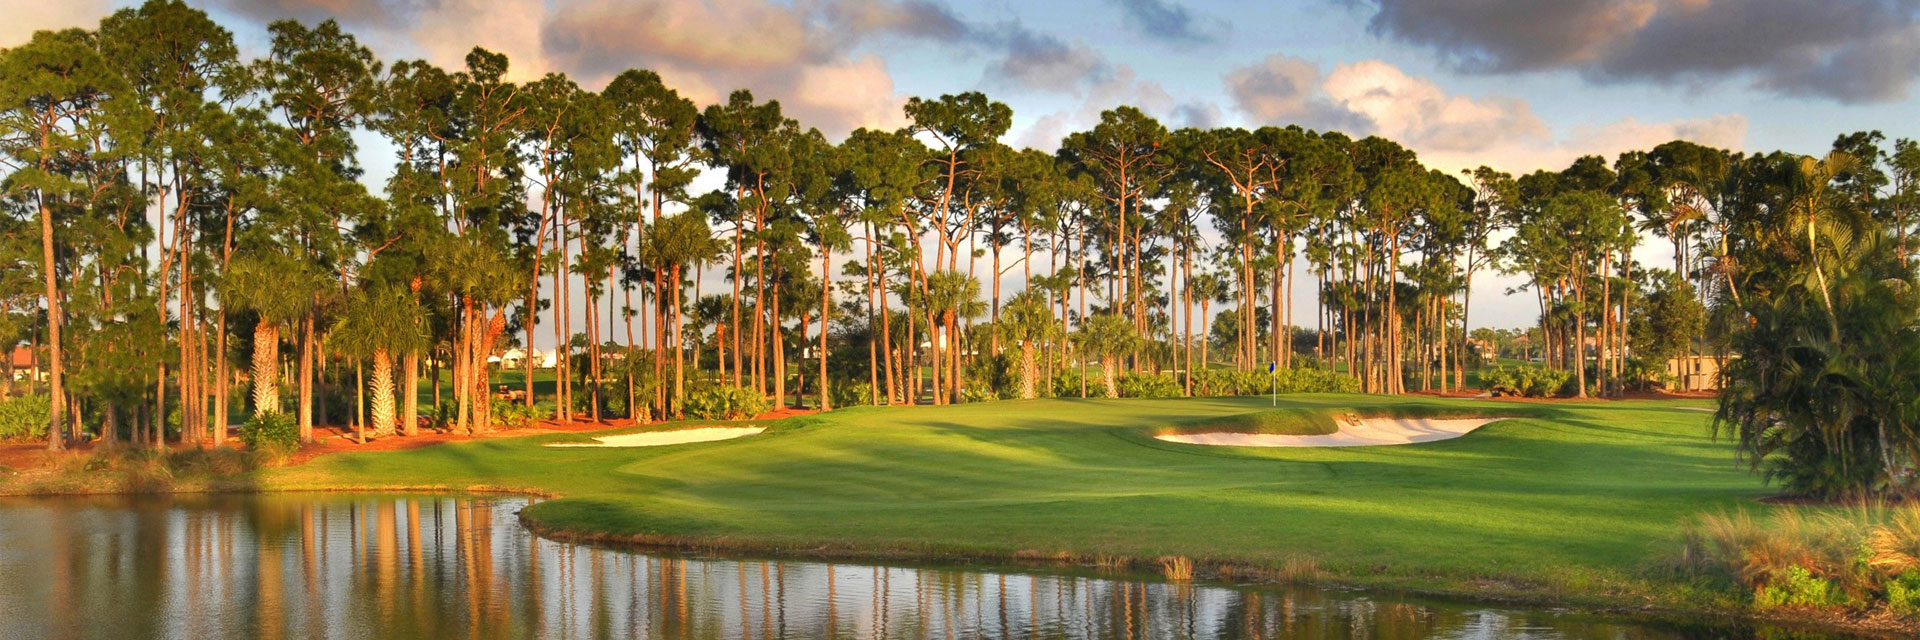 West Palm Beach Golf Package: PGA National Fall/Winter UNLIMITED Golf Getaway from $307 per person/per day!